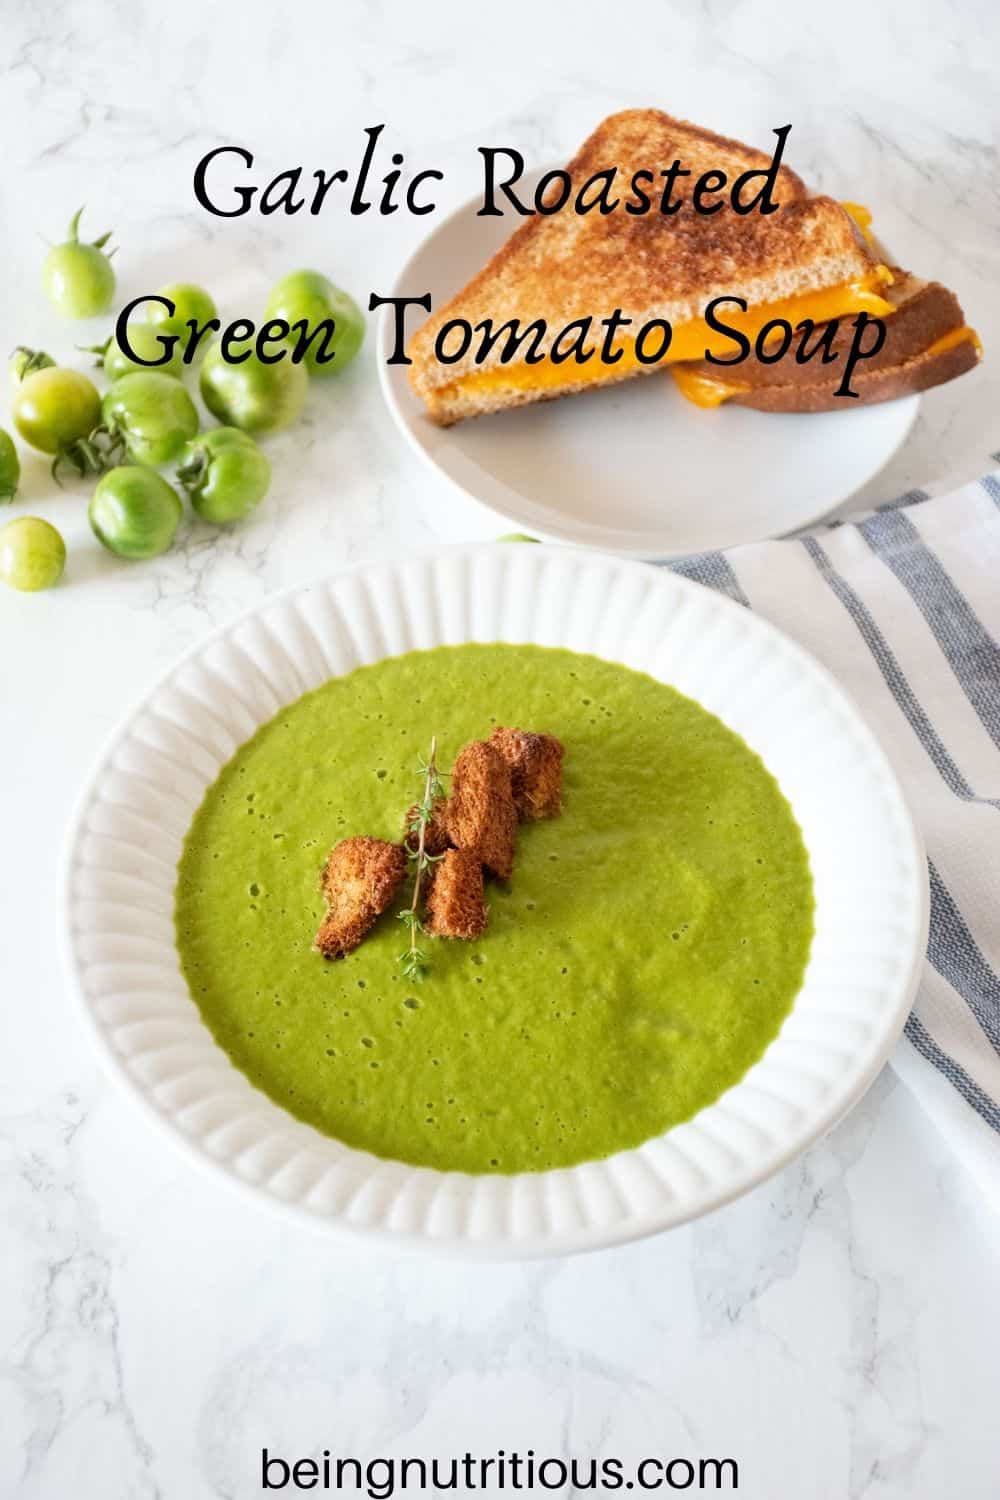 Green soup in a bowl with homemade croutons. Plate with grilled cheese sandwich in background. Text overlay: Garlic Roasted Green Tomato Soup.